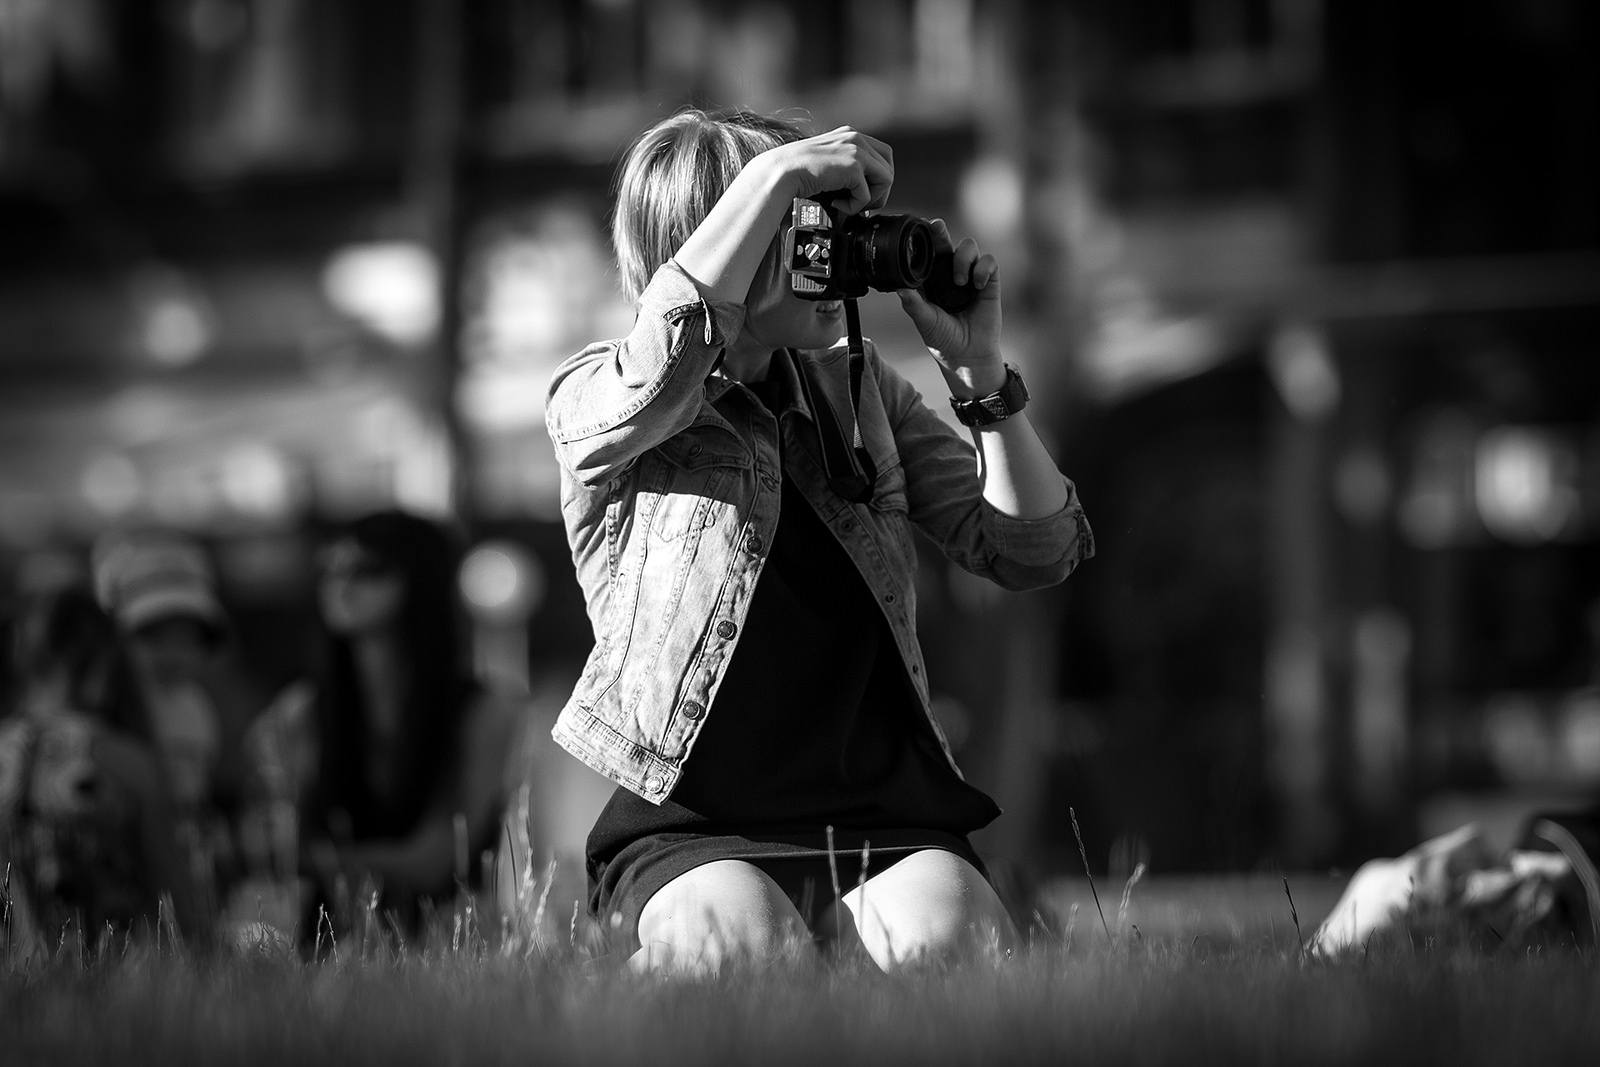 15 Photography Sites to Boost Your Skills